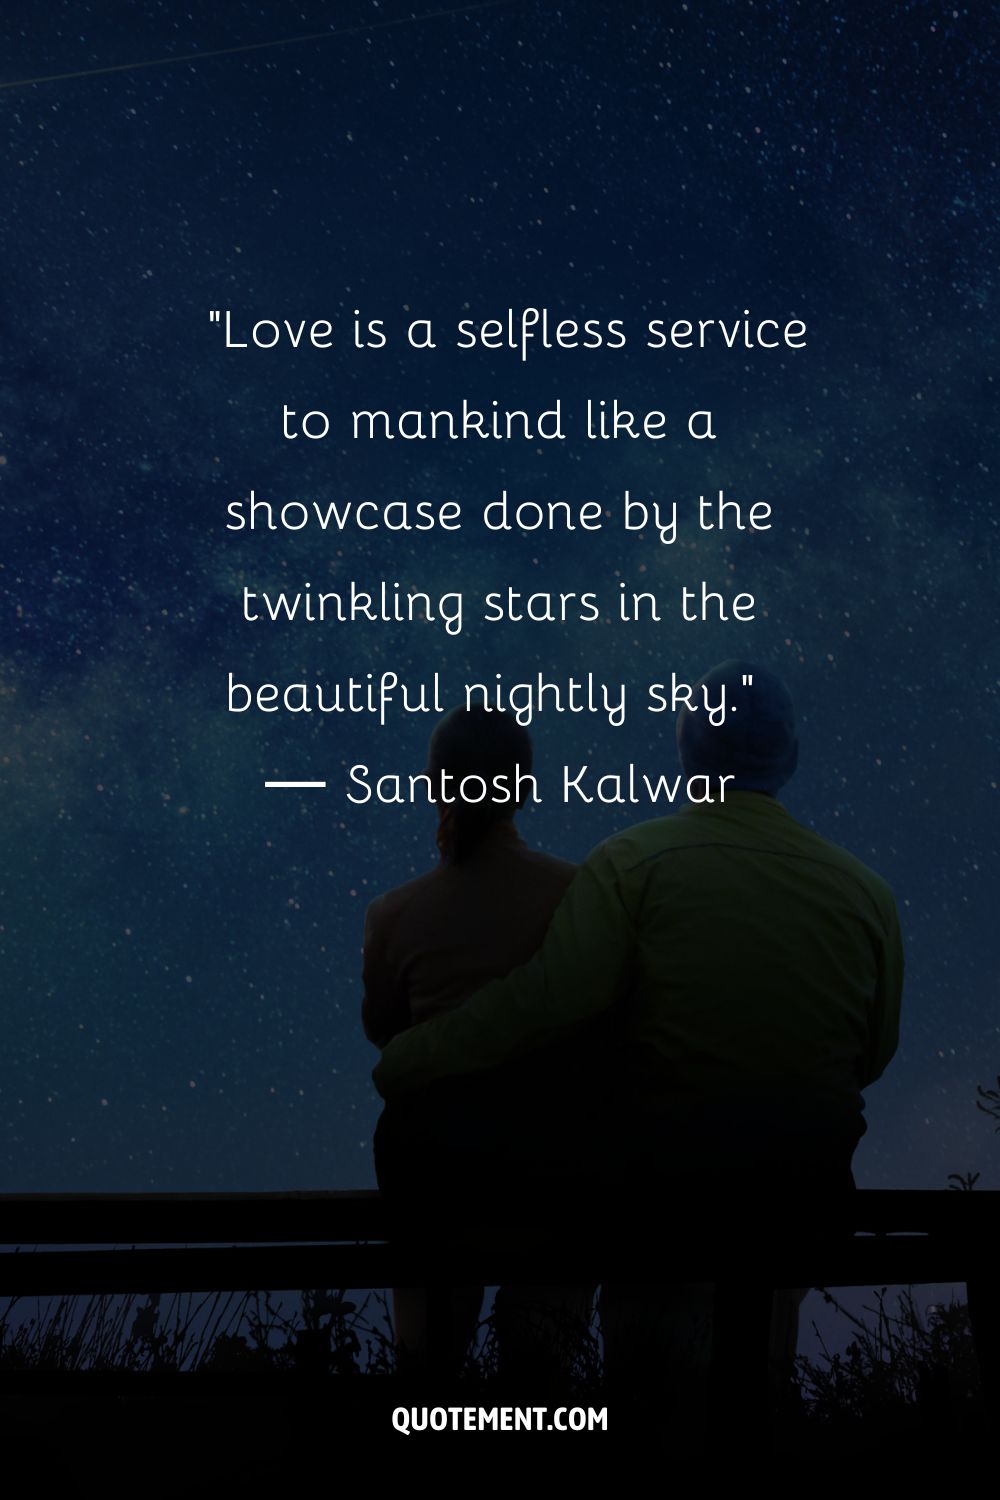 Two people sitting closely together against a starry night backdrop representing the night sky quote
